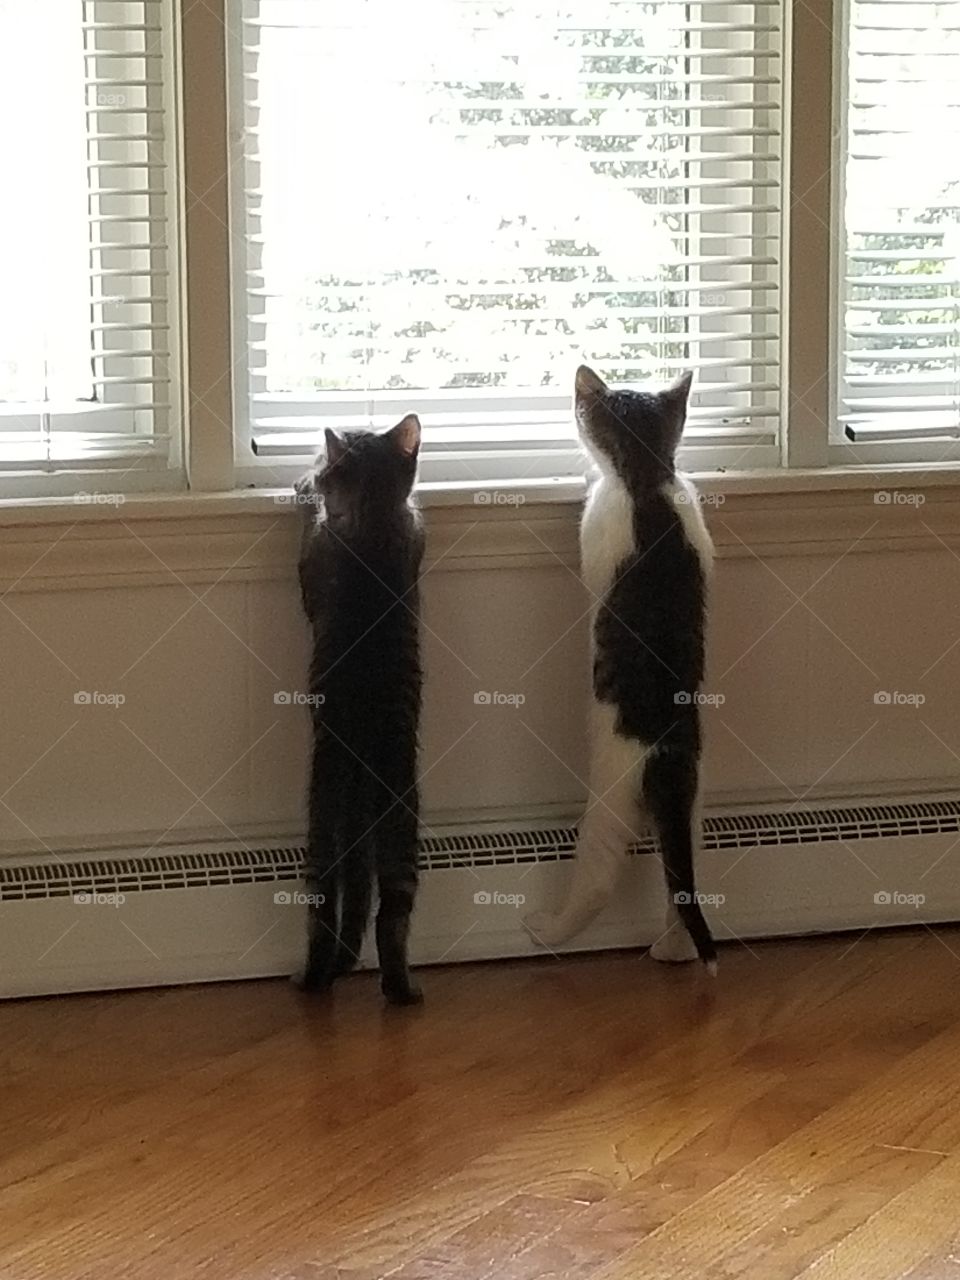 What's out there?